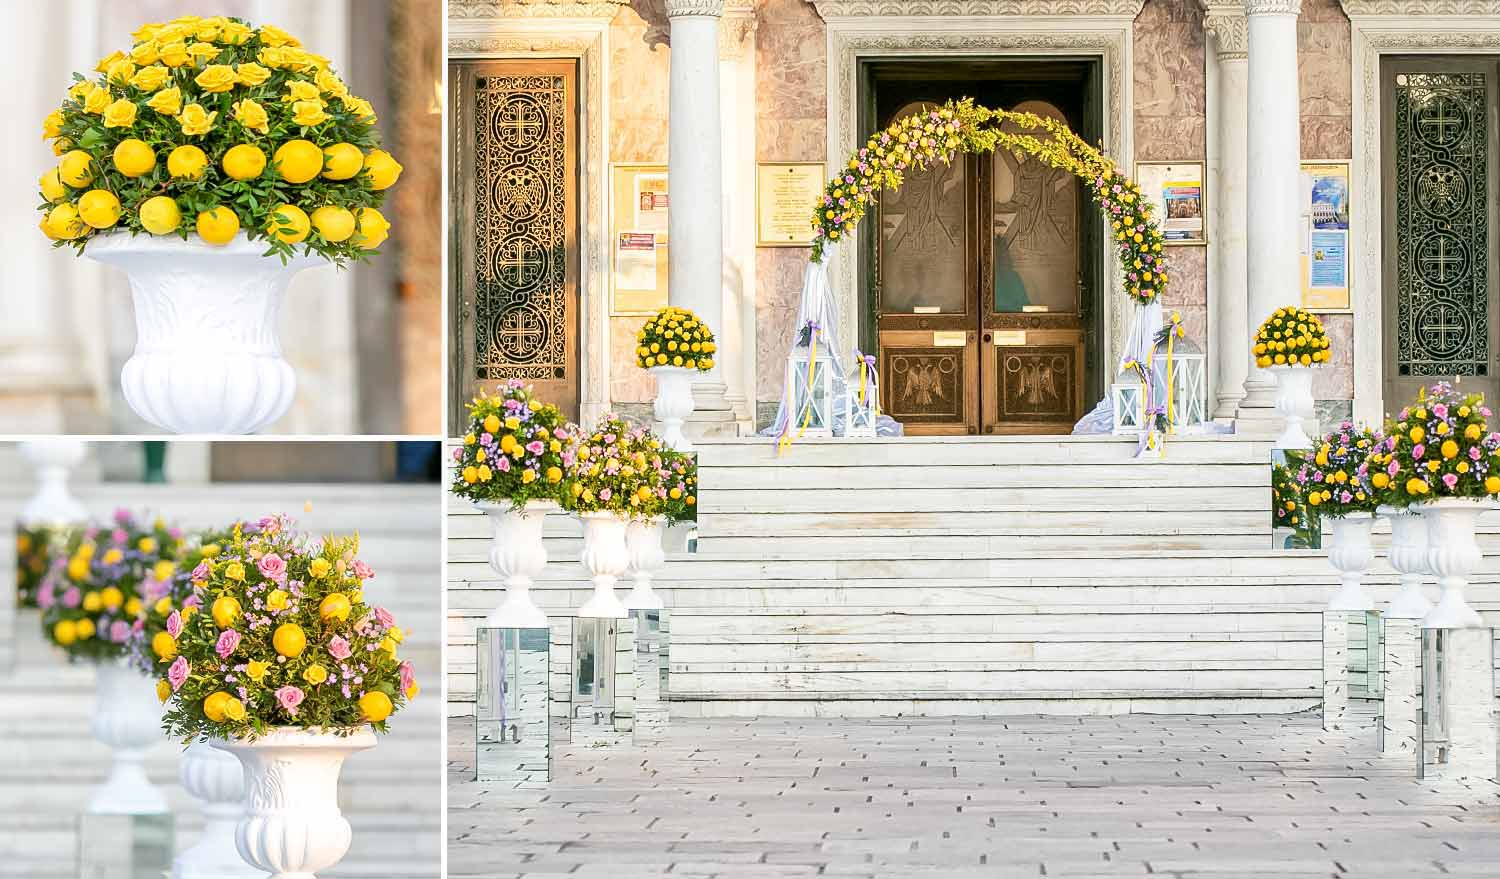 Saint andrews church aisle with lemons and yellow roses by Diamond Events 1